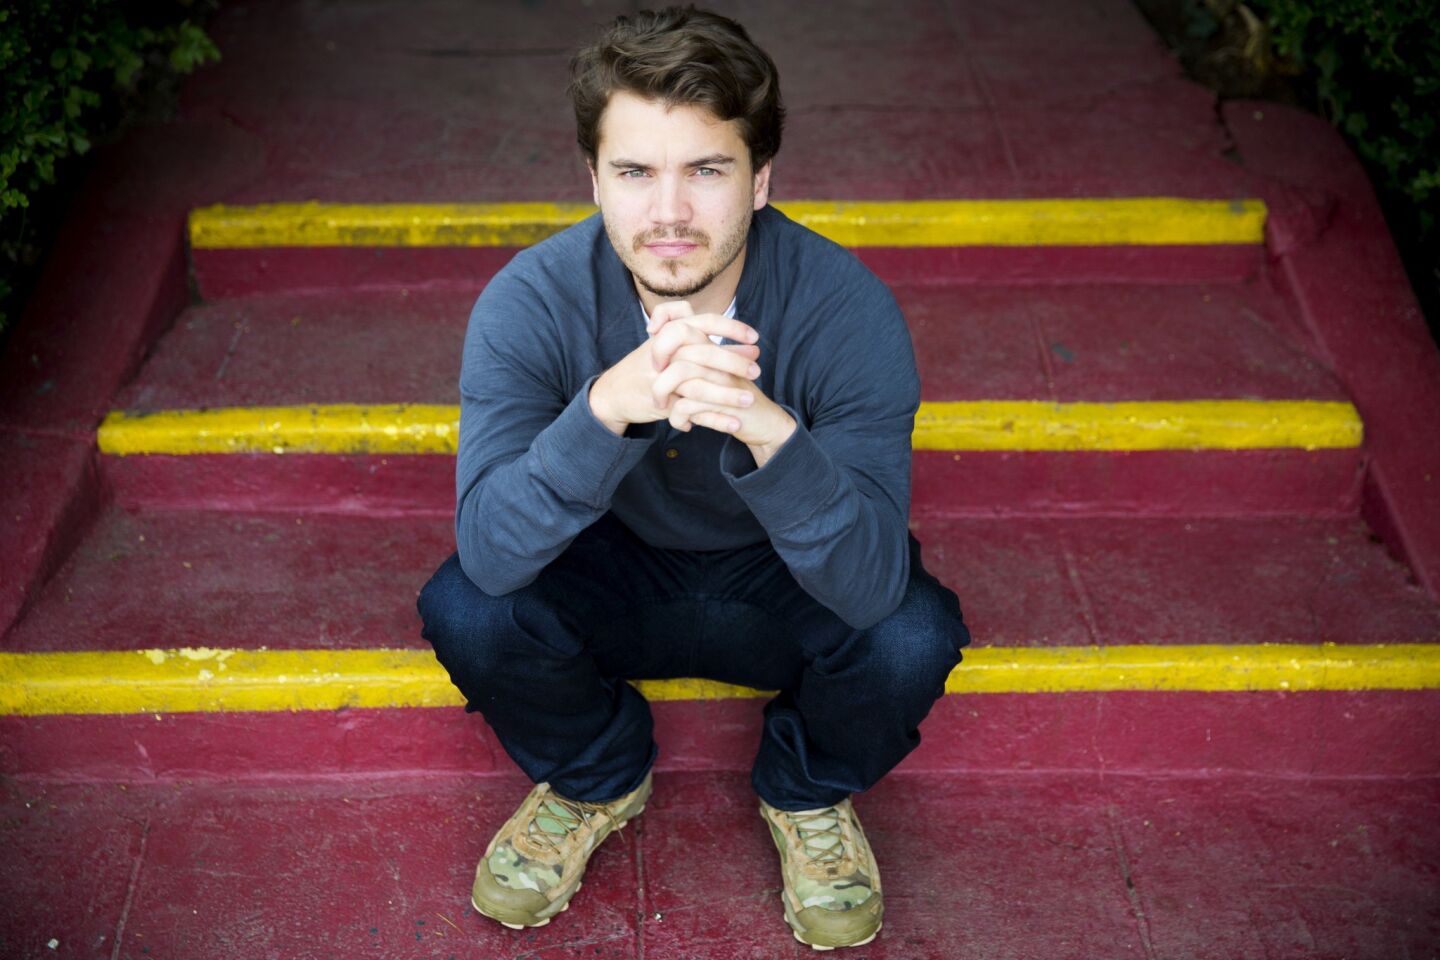 Emile Hirsch became a father for the first time to little Valor in November 2013. The child's mother's identity has not been revealed but is reportedly a woman he met at an Oscar after-party in 2013 and dated. "Emile showed up after the baby was born and he is spending time bonding with his new child," a source told E! News. Hirsch and his son's mother are in good standing and plan to raise their little guy together.